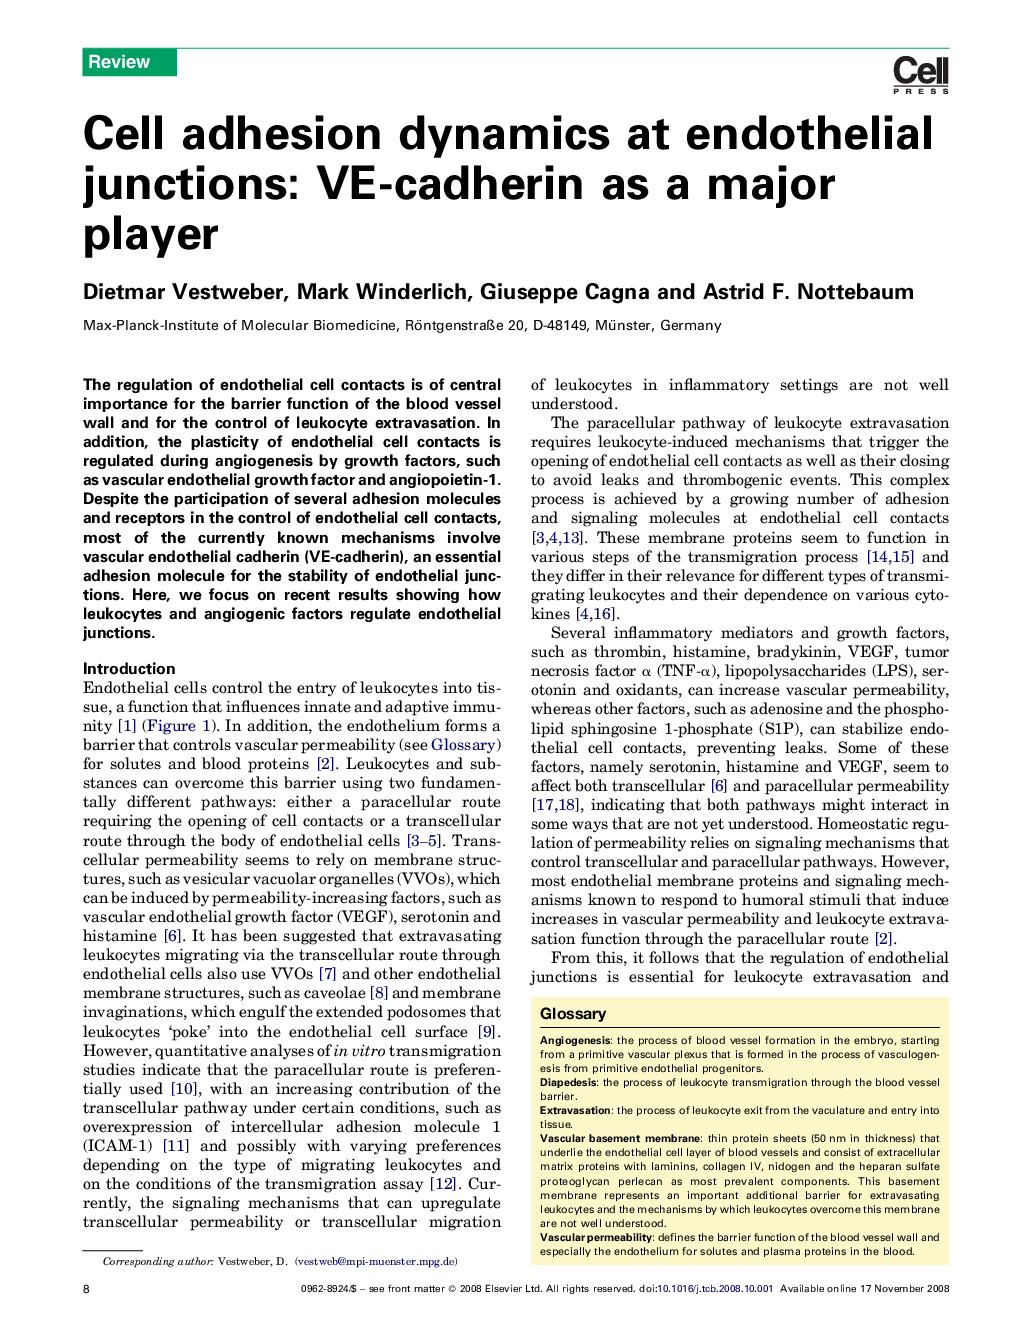 Cell adhesion dynamics at endothelial junctions: VE-cadherin as a major player